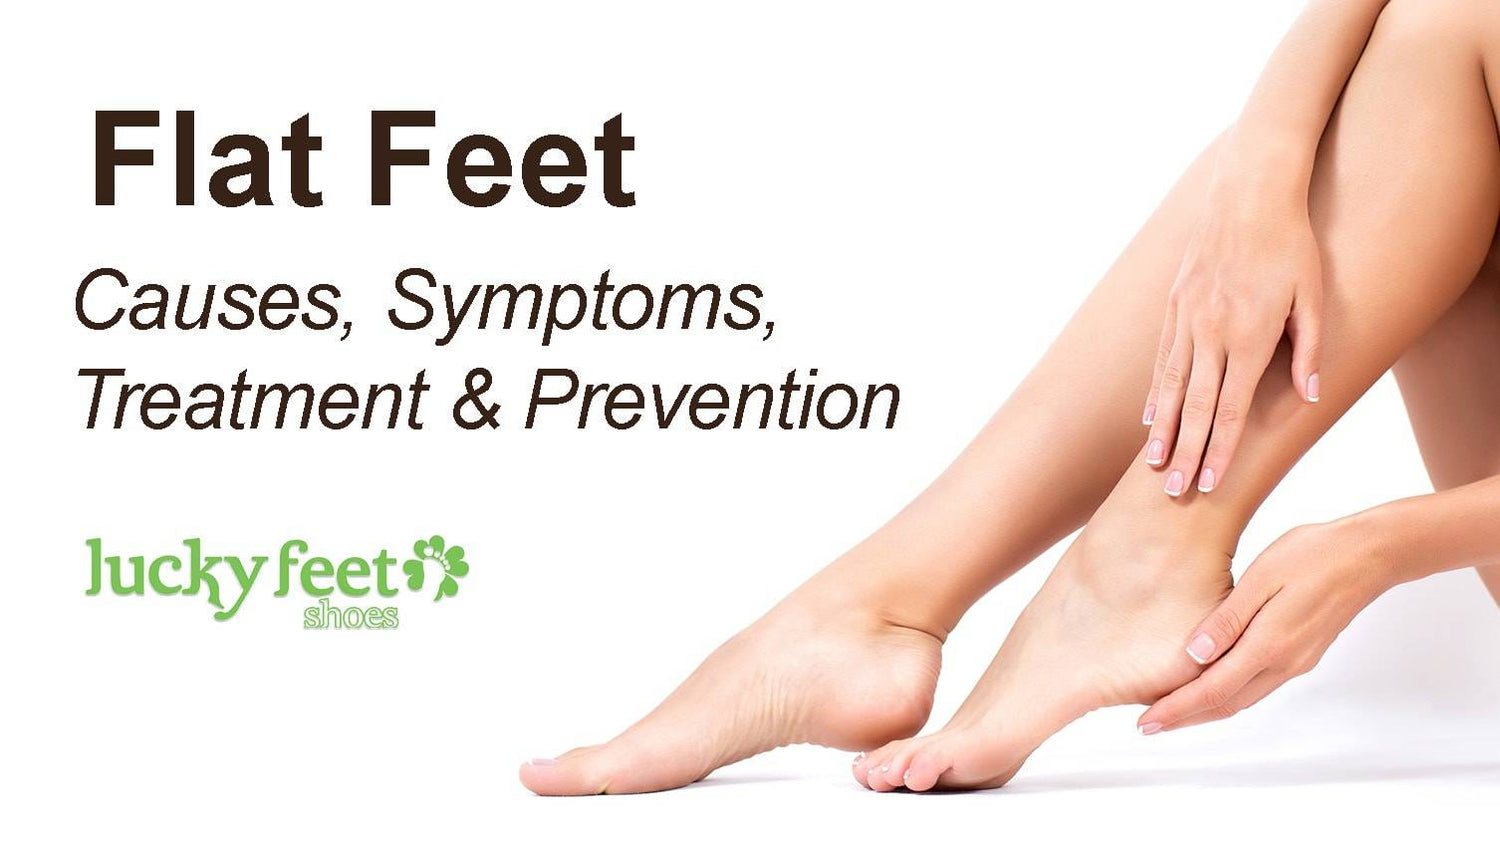 Learn More About Flat Feet, Symptoms and Options | Feet